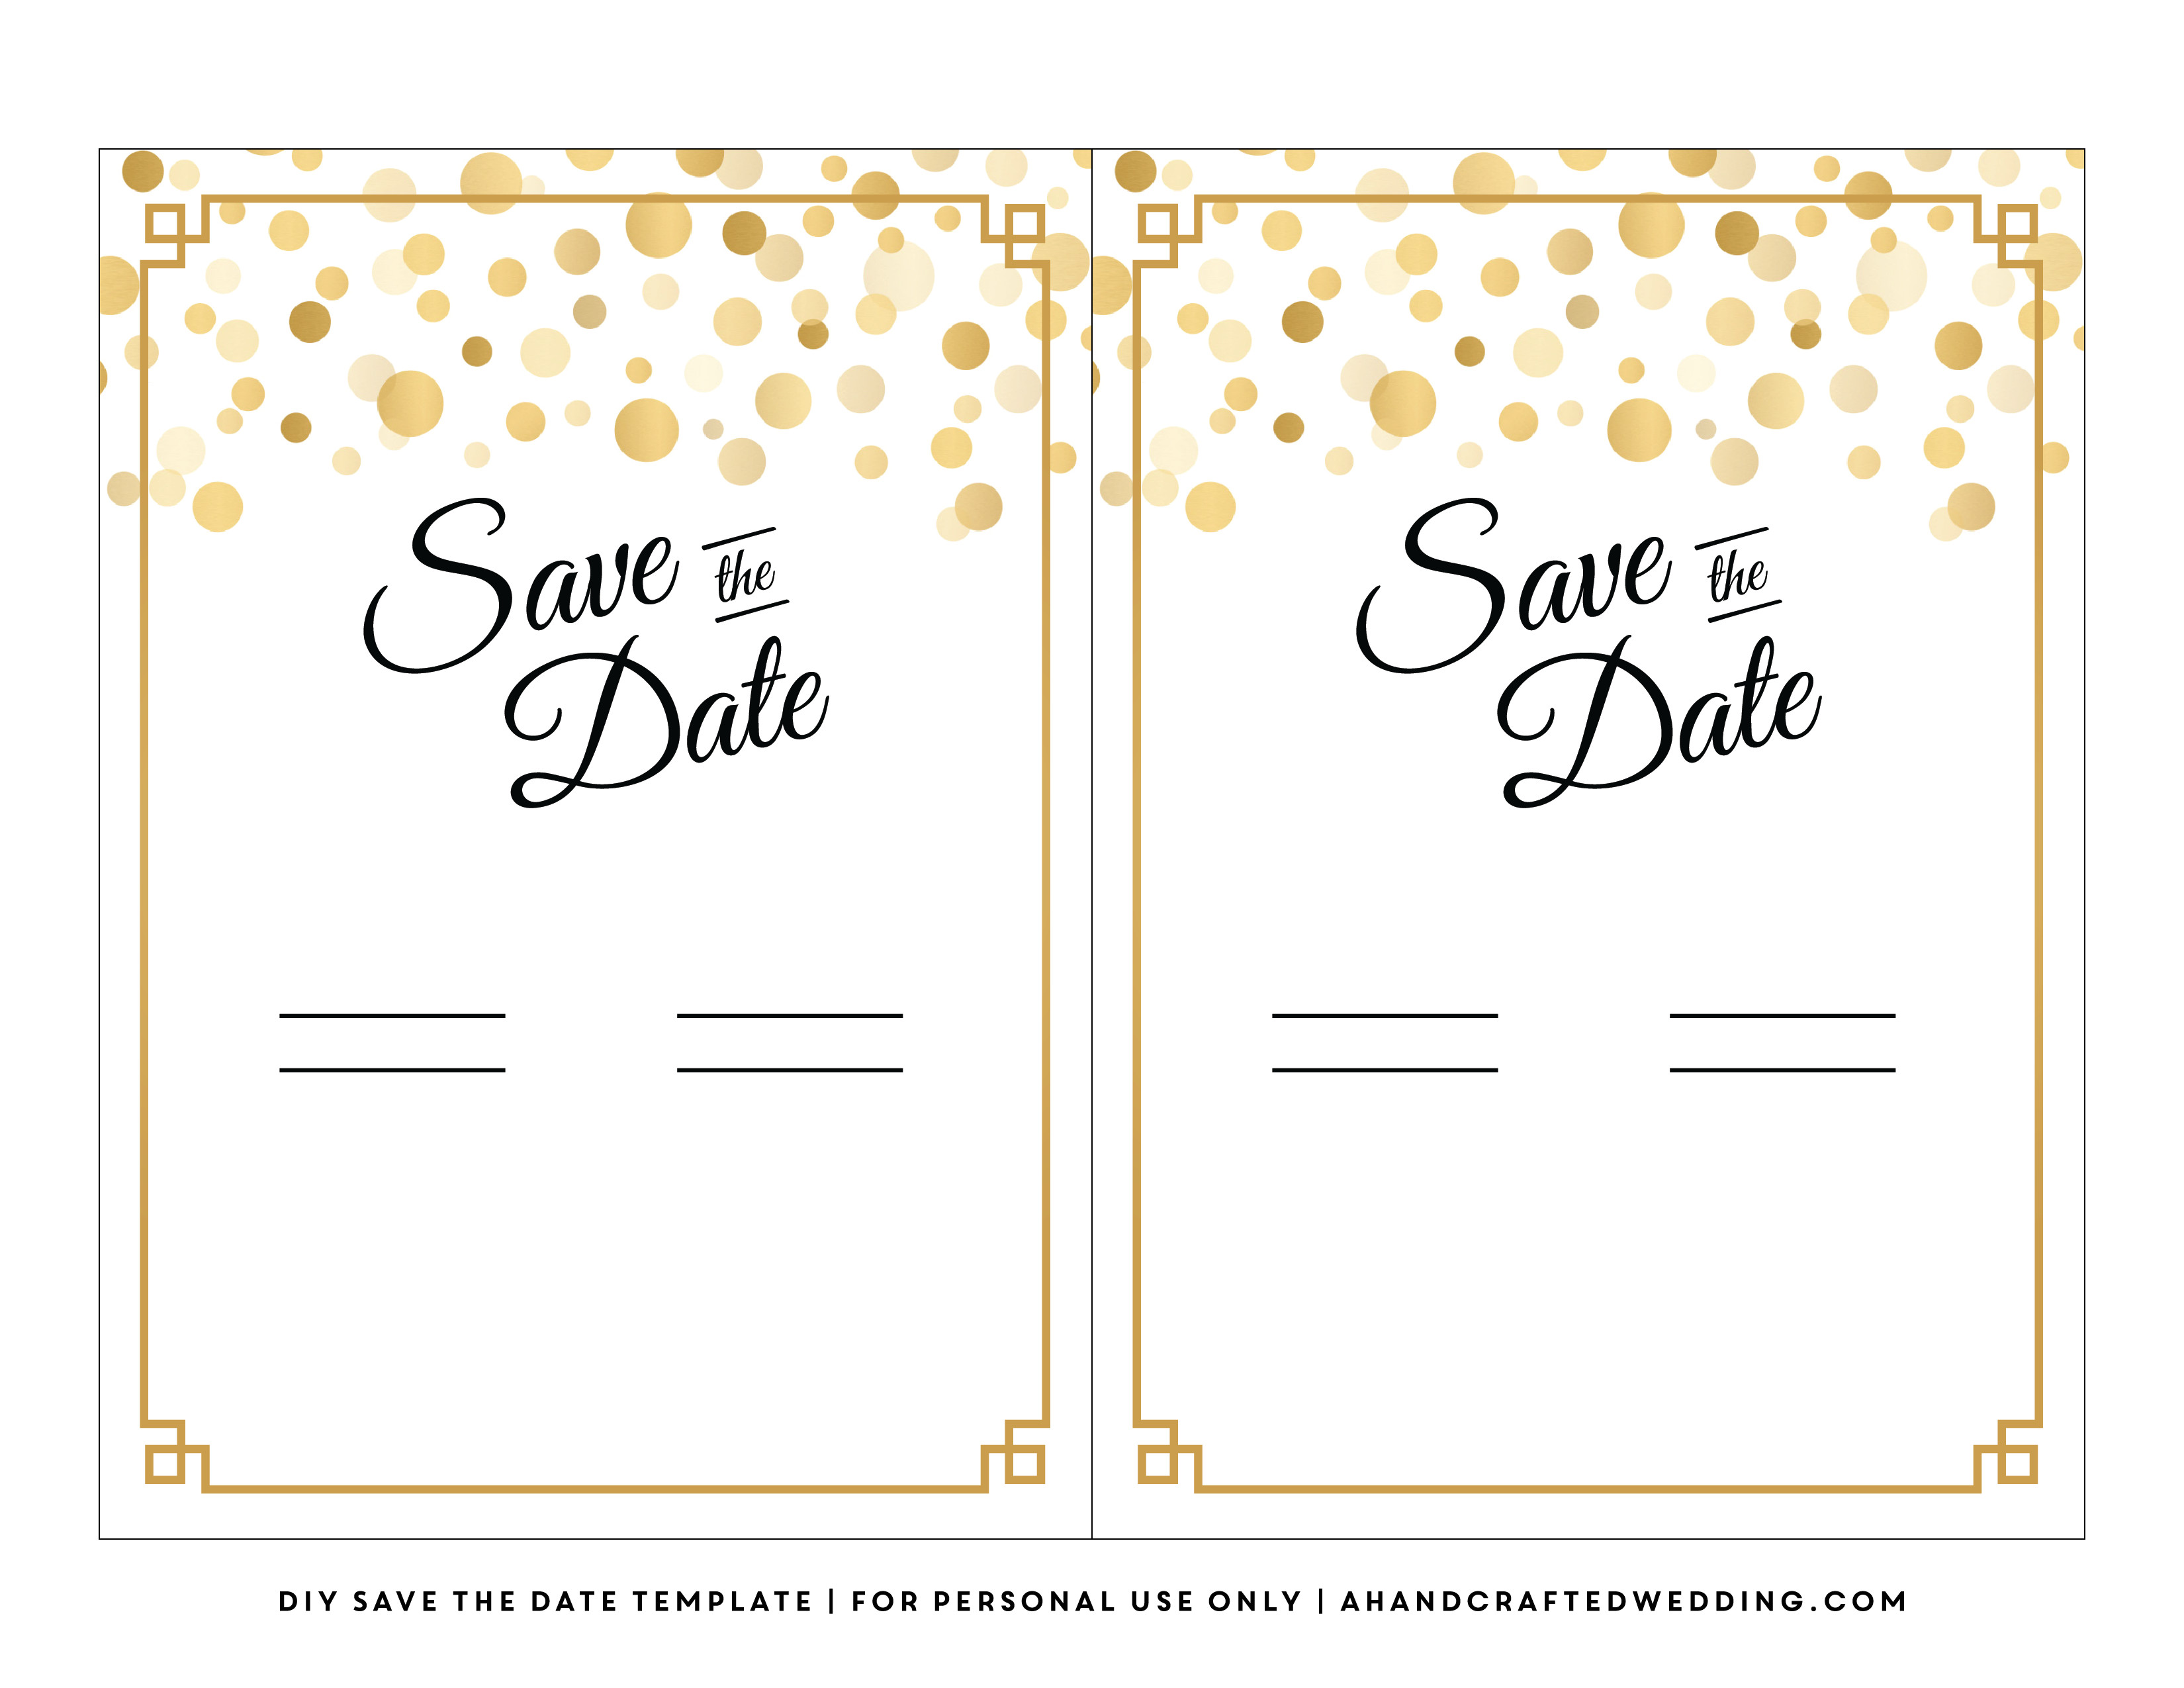 post diy save the date template 372788